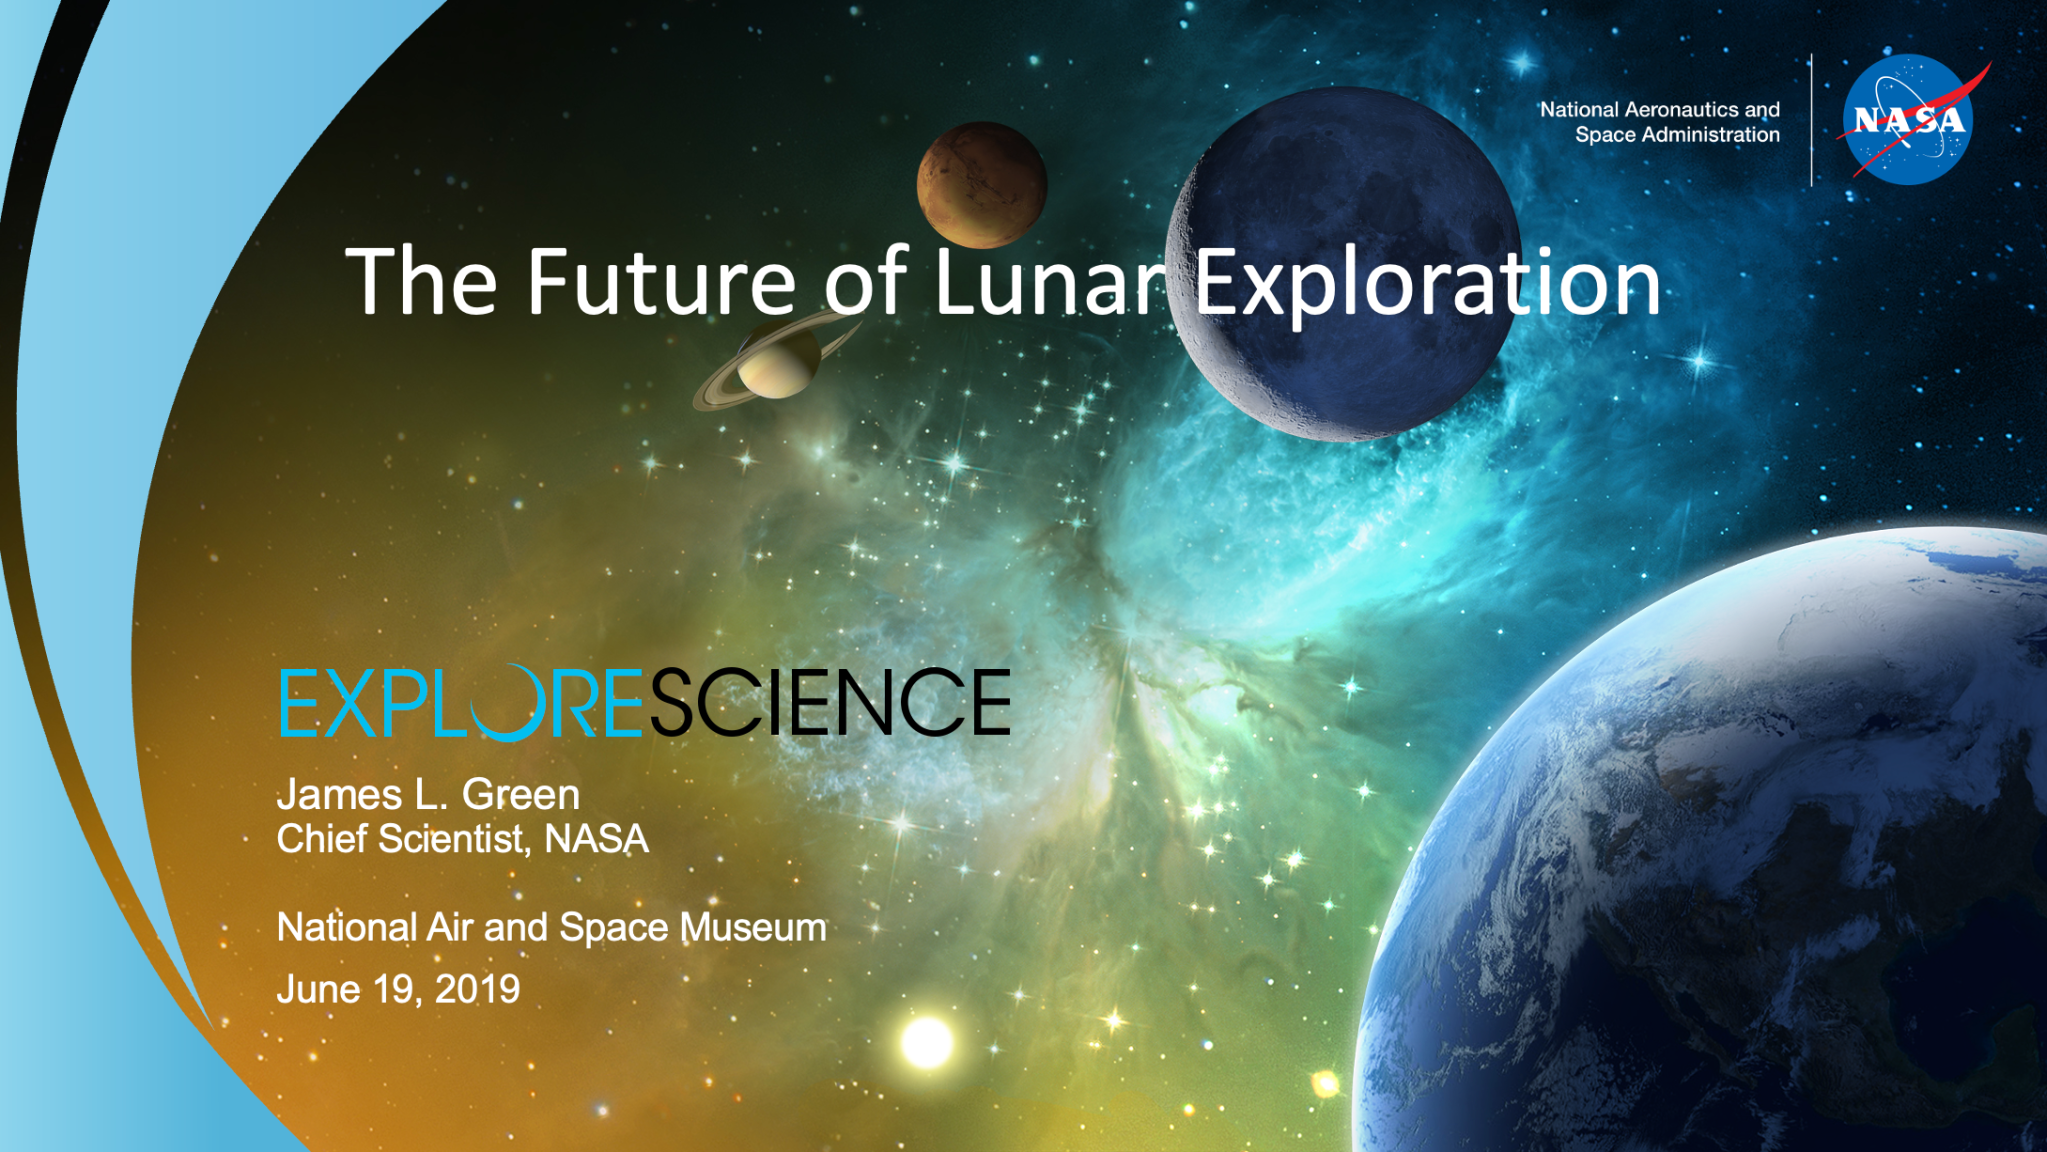 The Future of Lunar Exploration Presentation Cover - James L. Green Chief Scientist, NASA National Air and Space Museum June 19, 2019